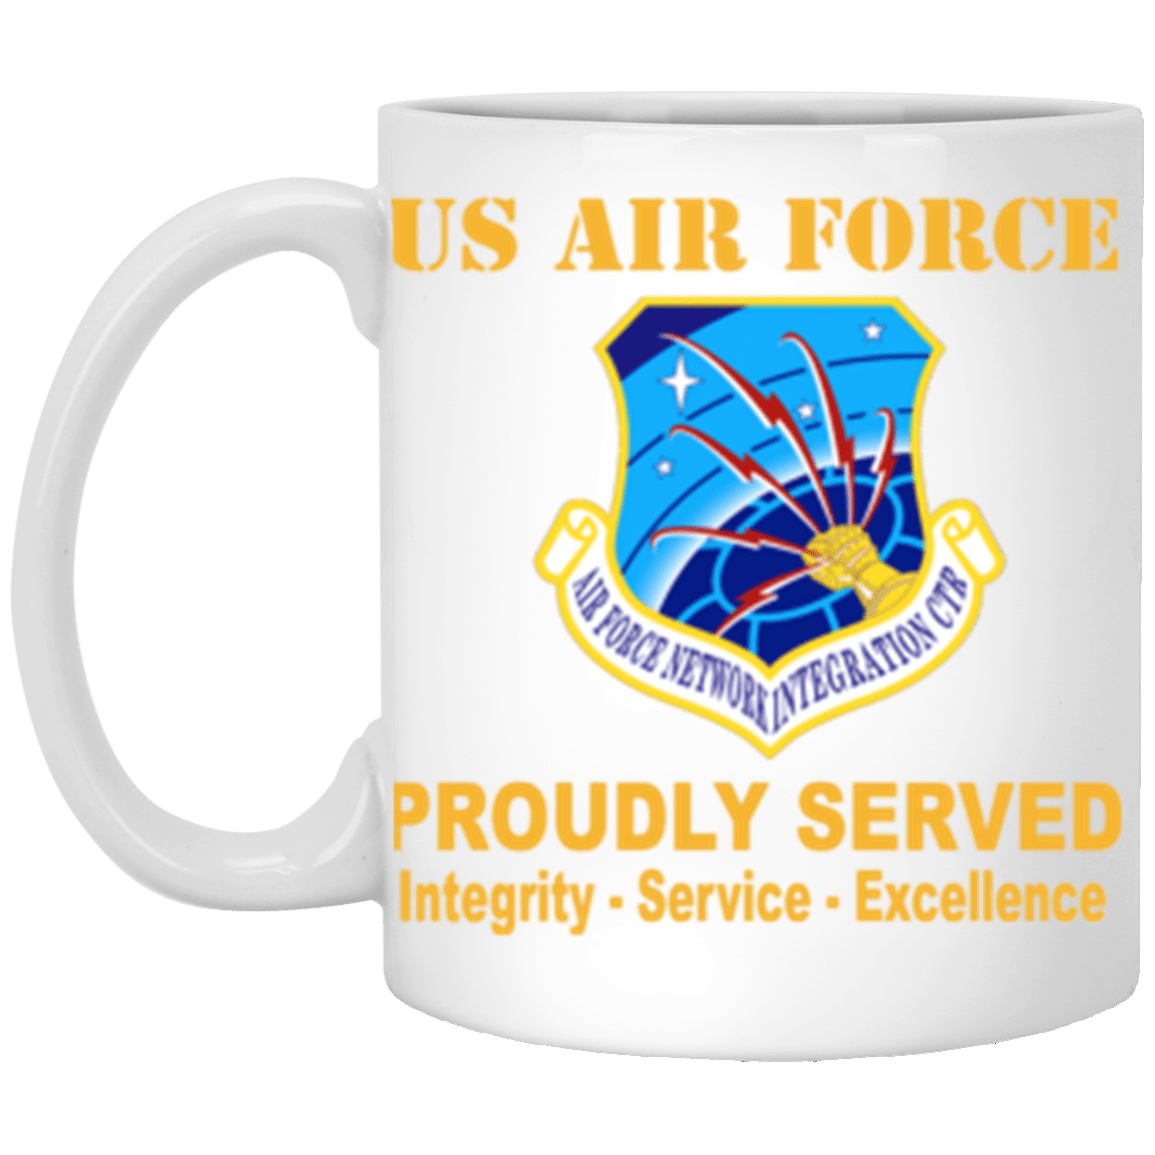 US Air Force Communications Command Proudly Served Core Values 11 oz. White Mug-Drinkware-Veterans Nation